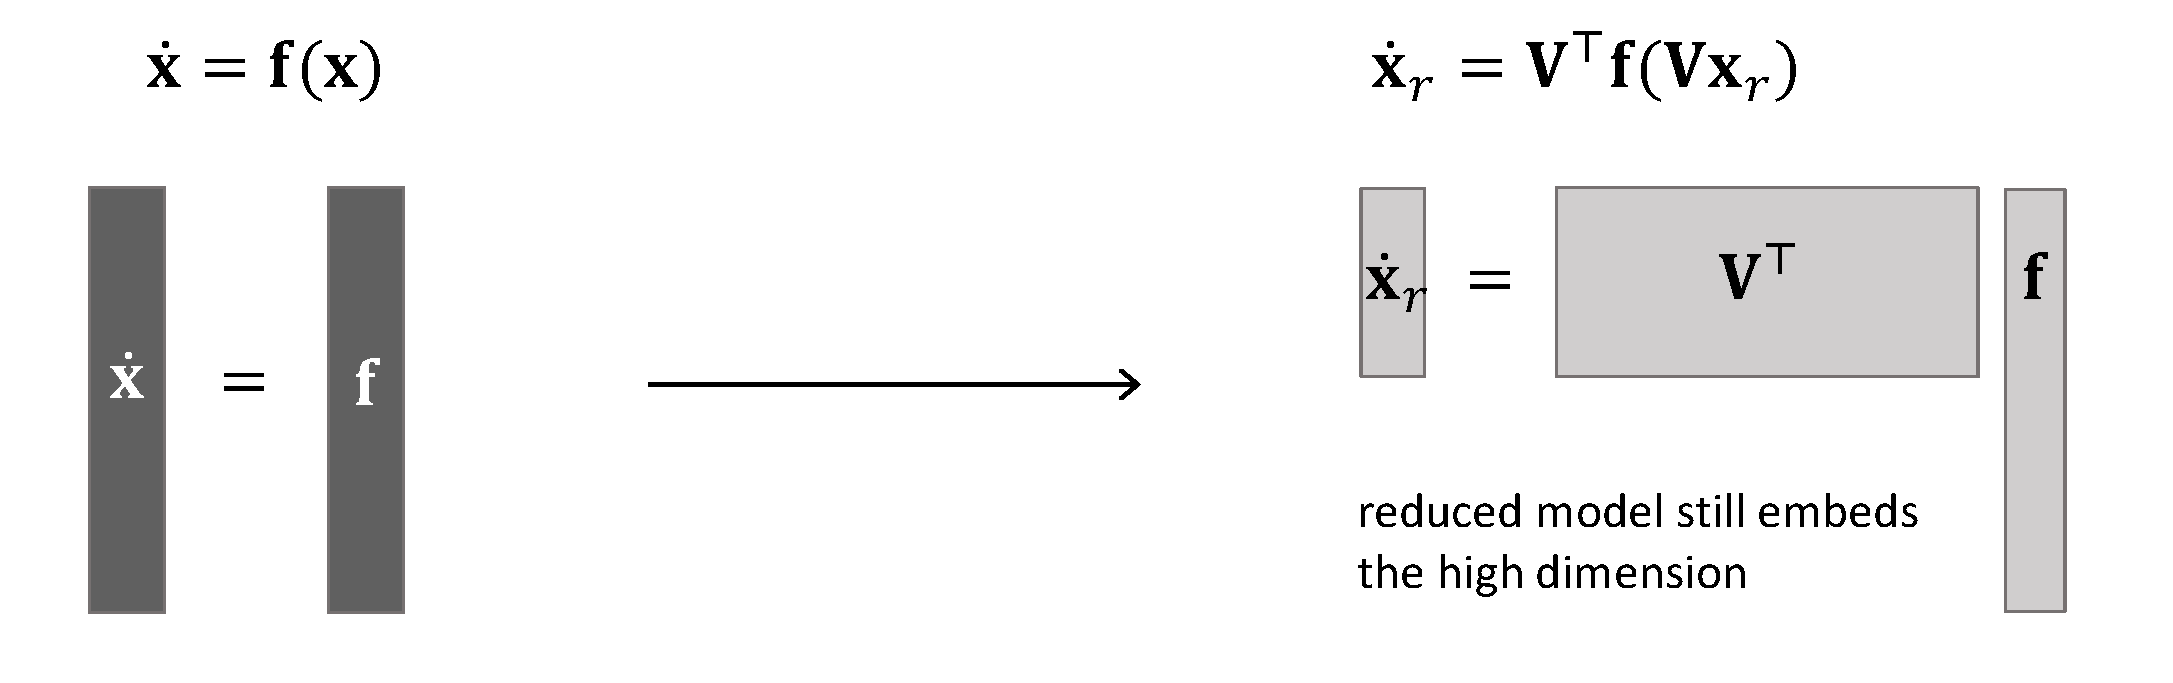 projection of a nonlinear model still embeds the high dimension of the original system